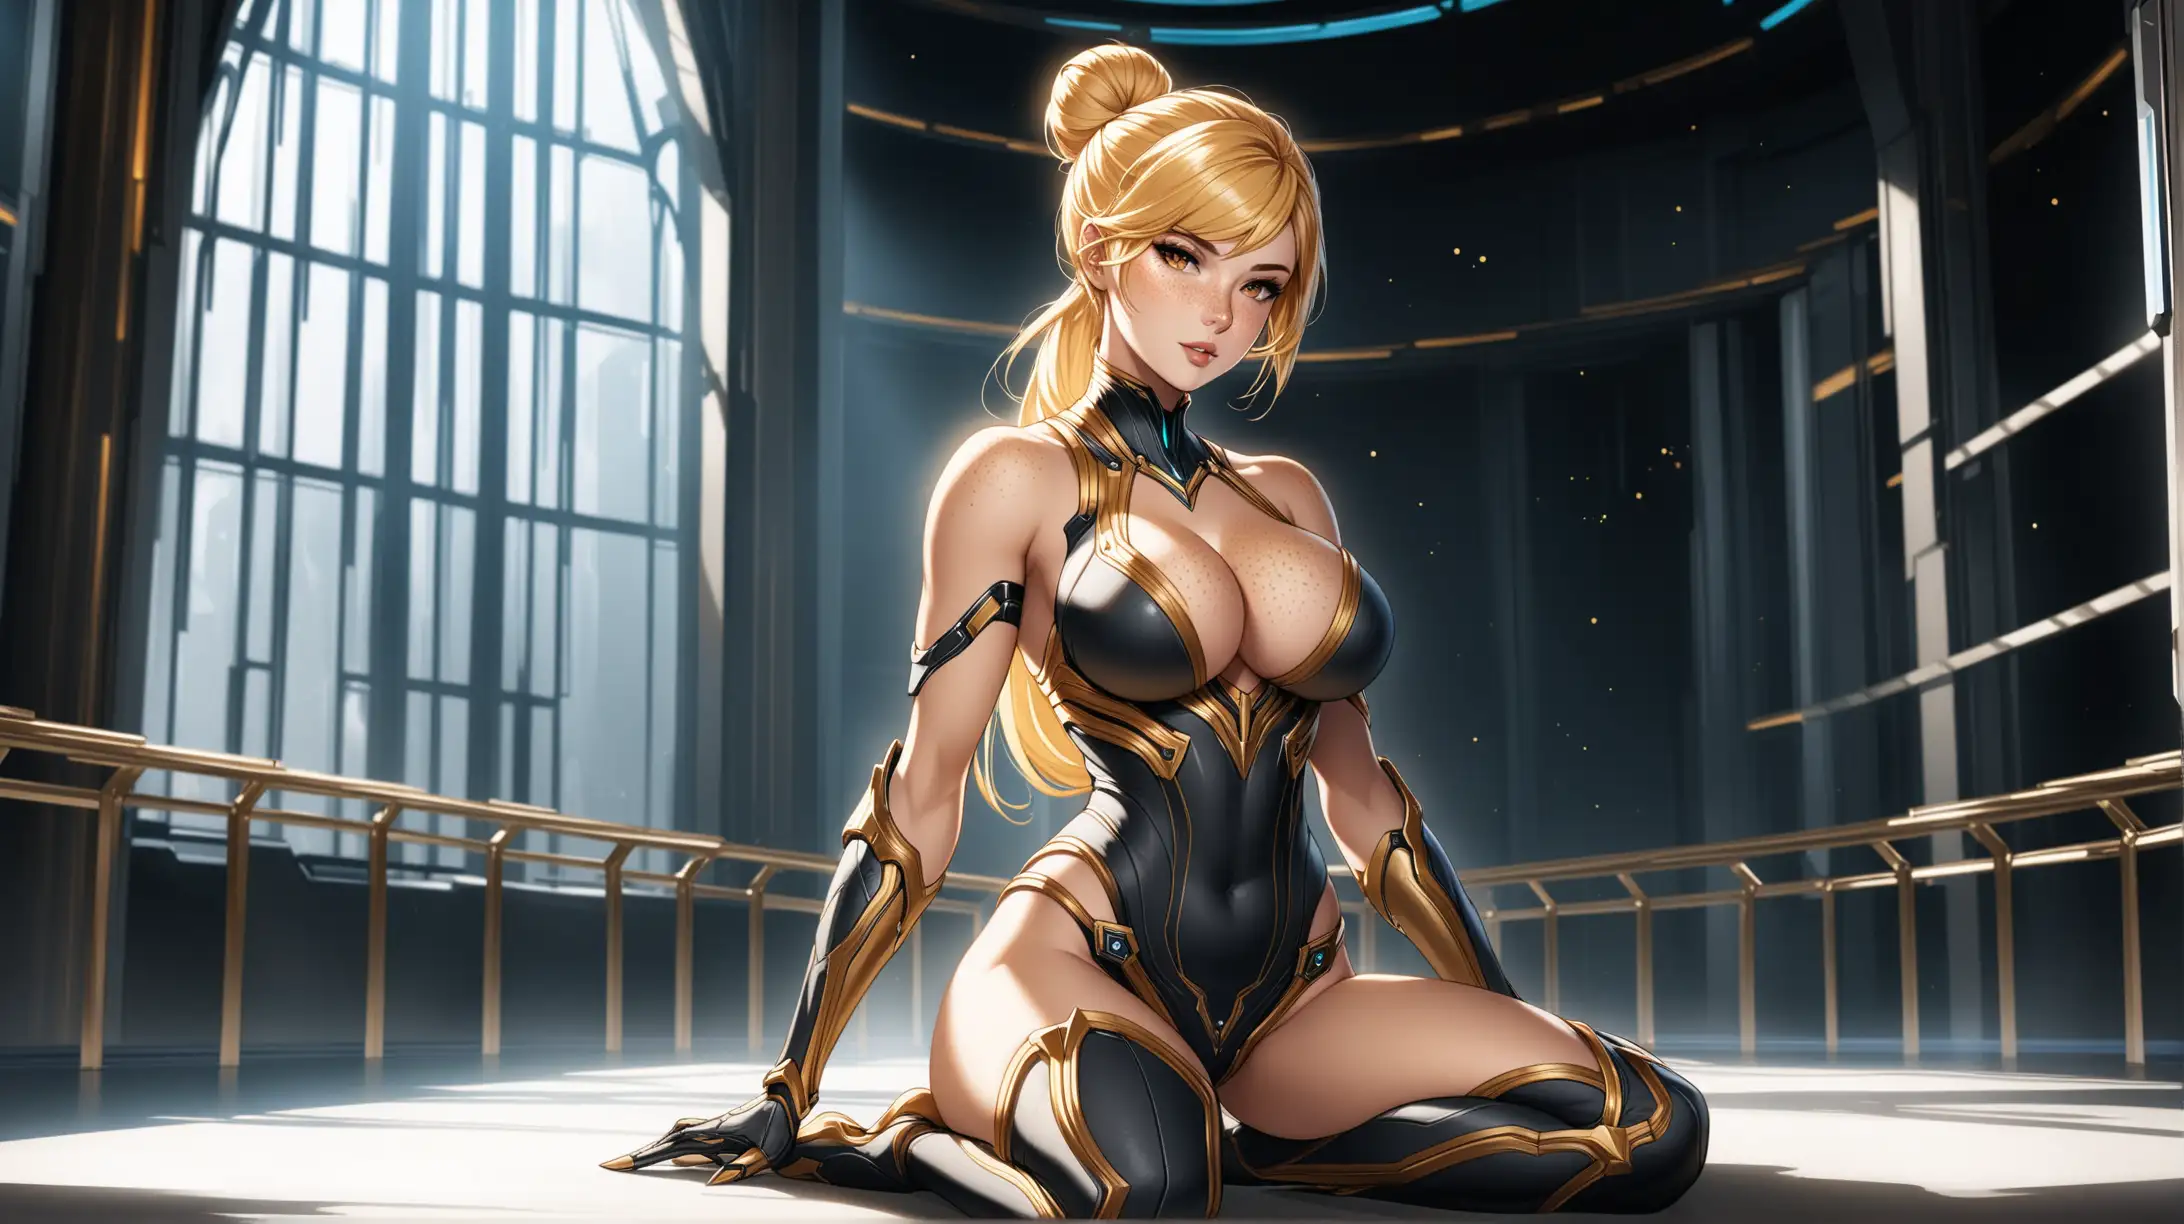 Seductive Blonde Woman in Warframeinspired Outfit with Natural Lighting